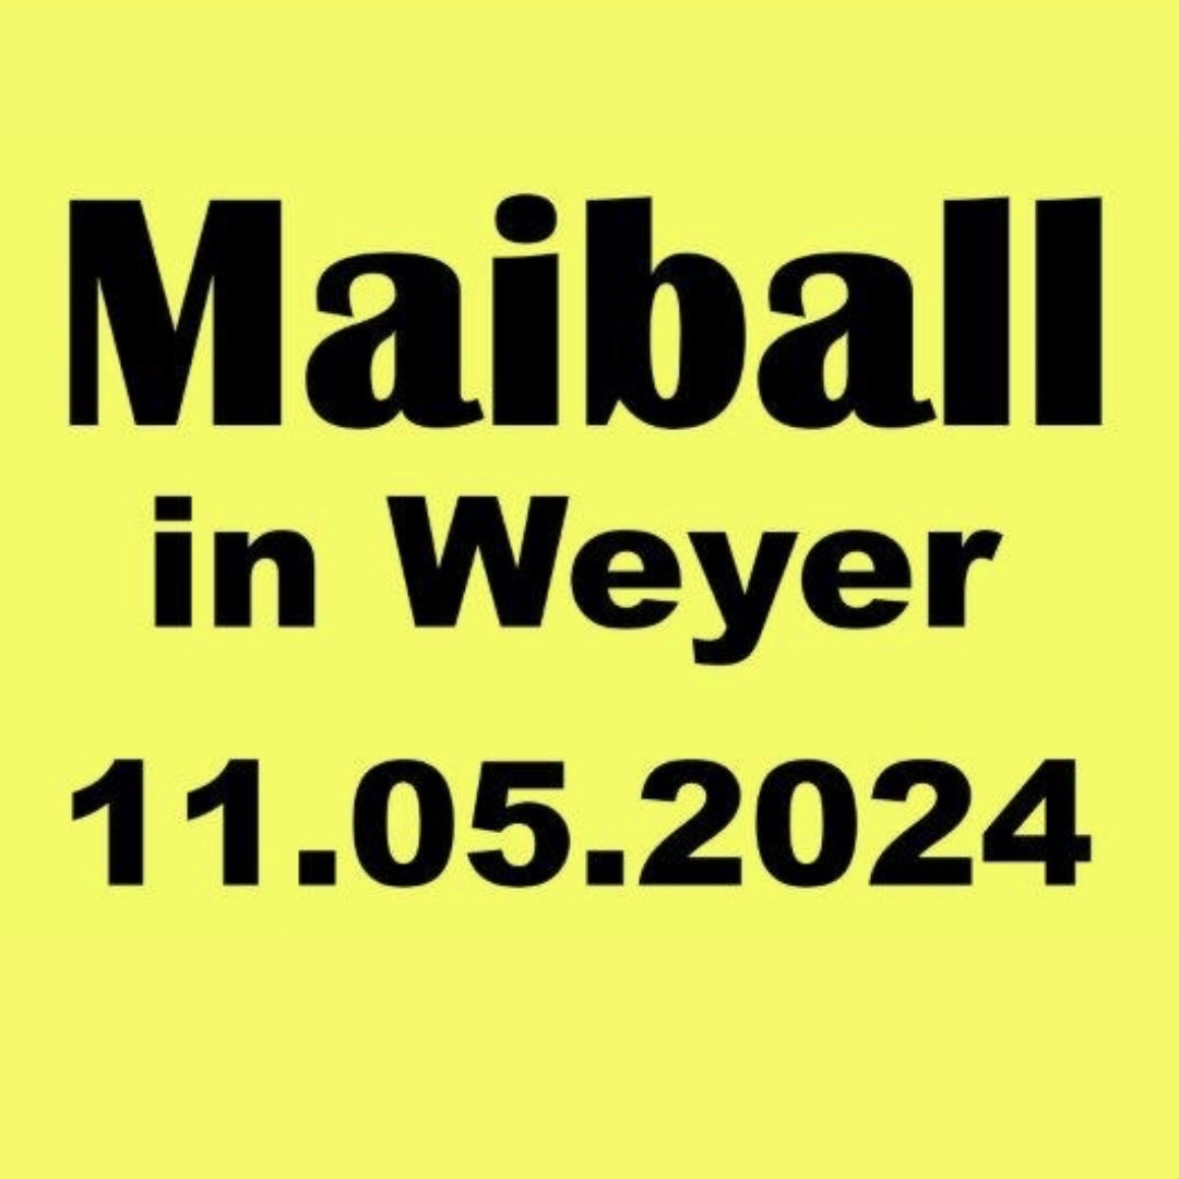 Maiball in Weyer 2024